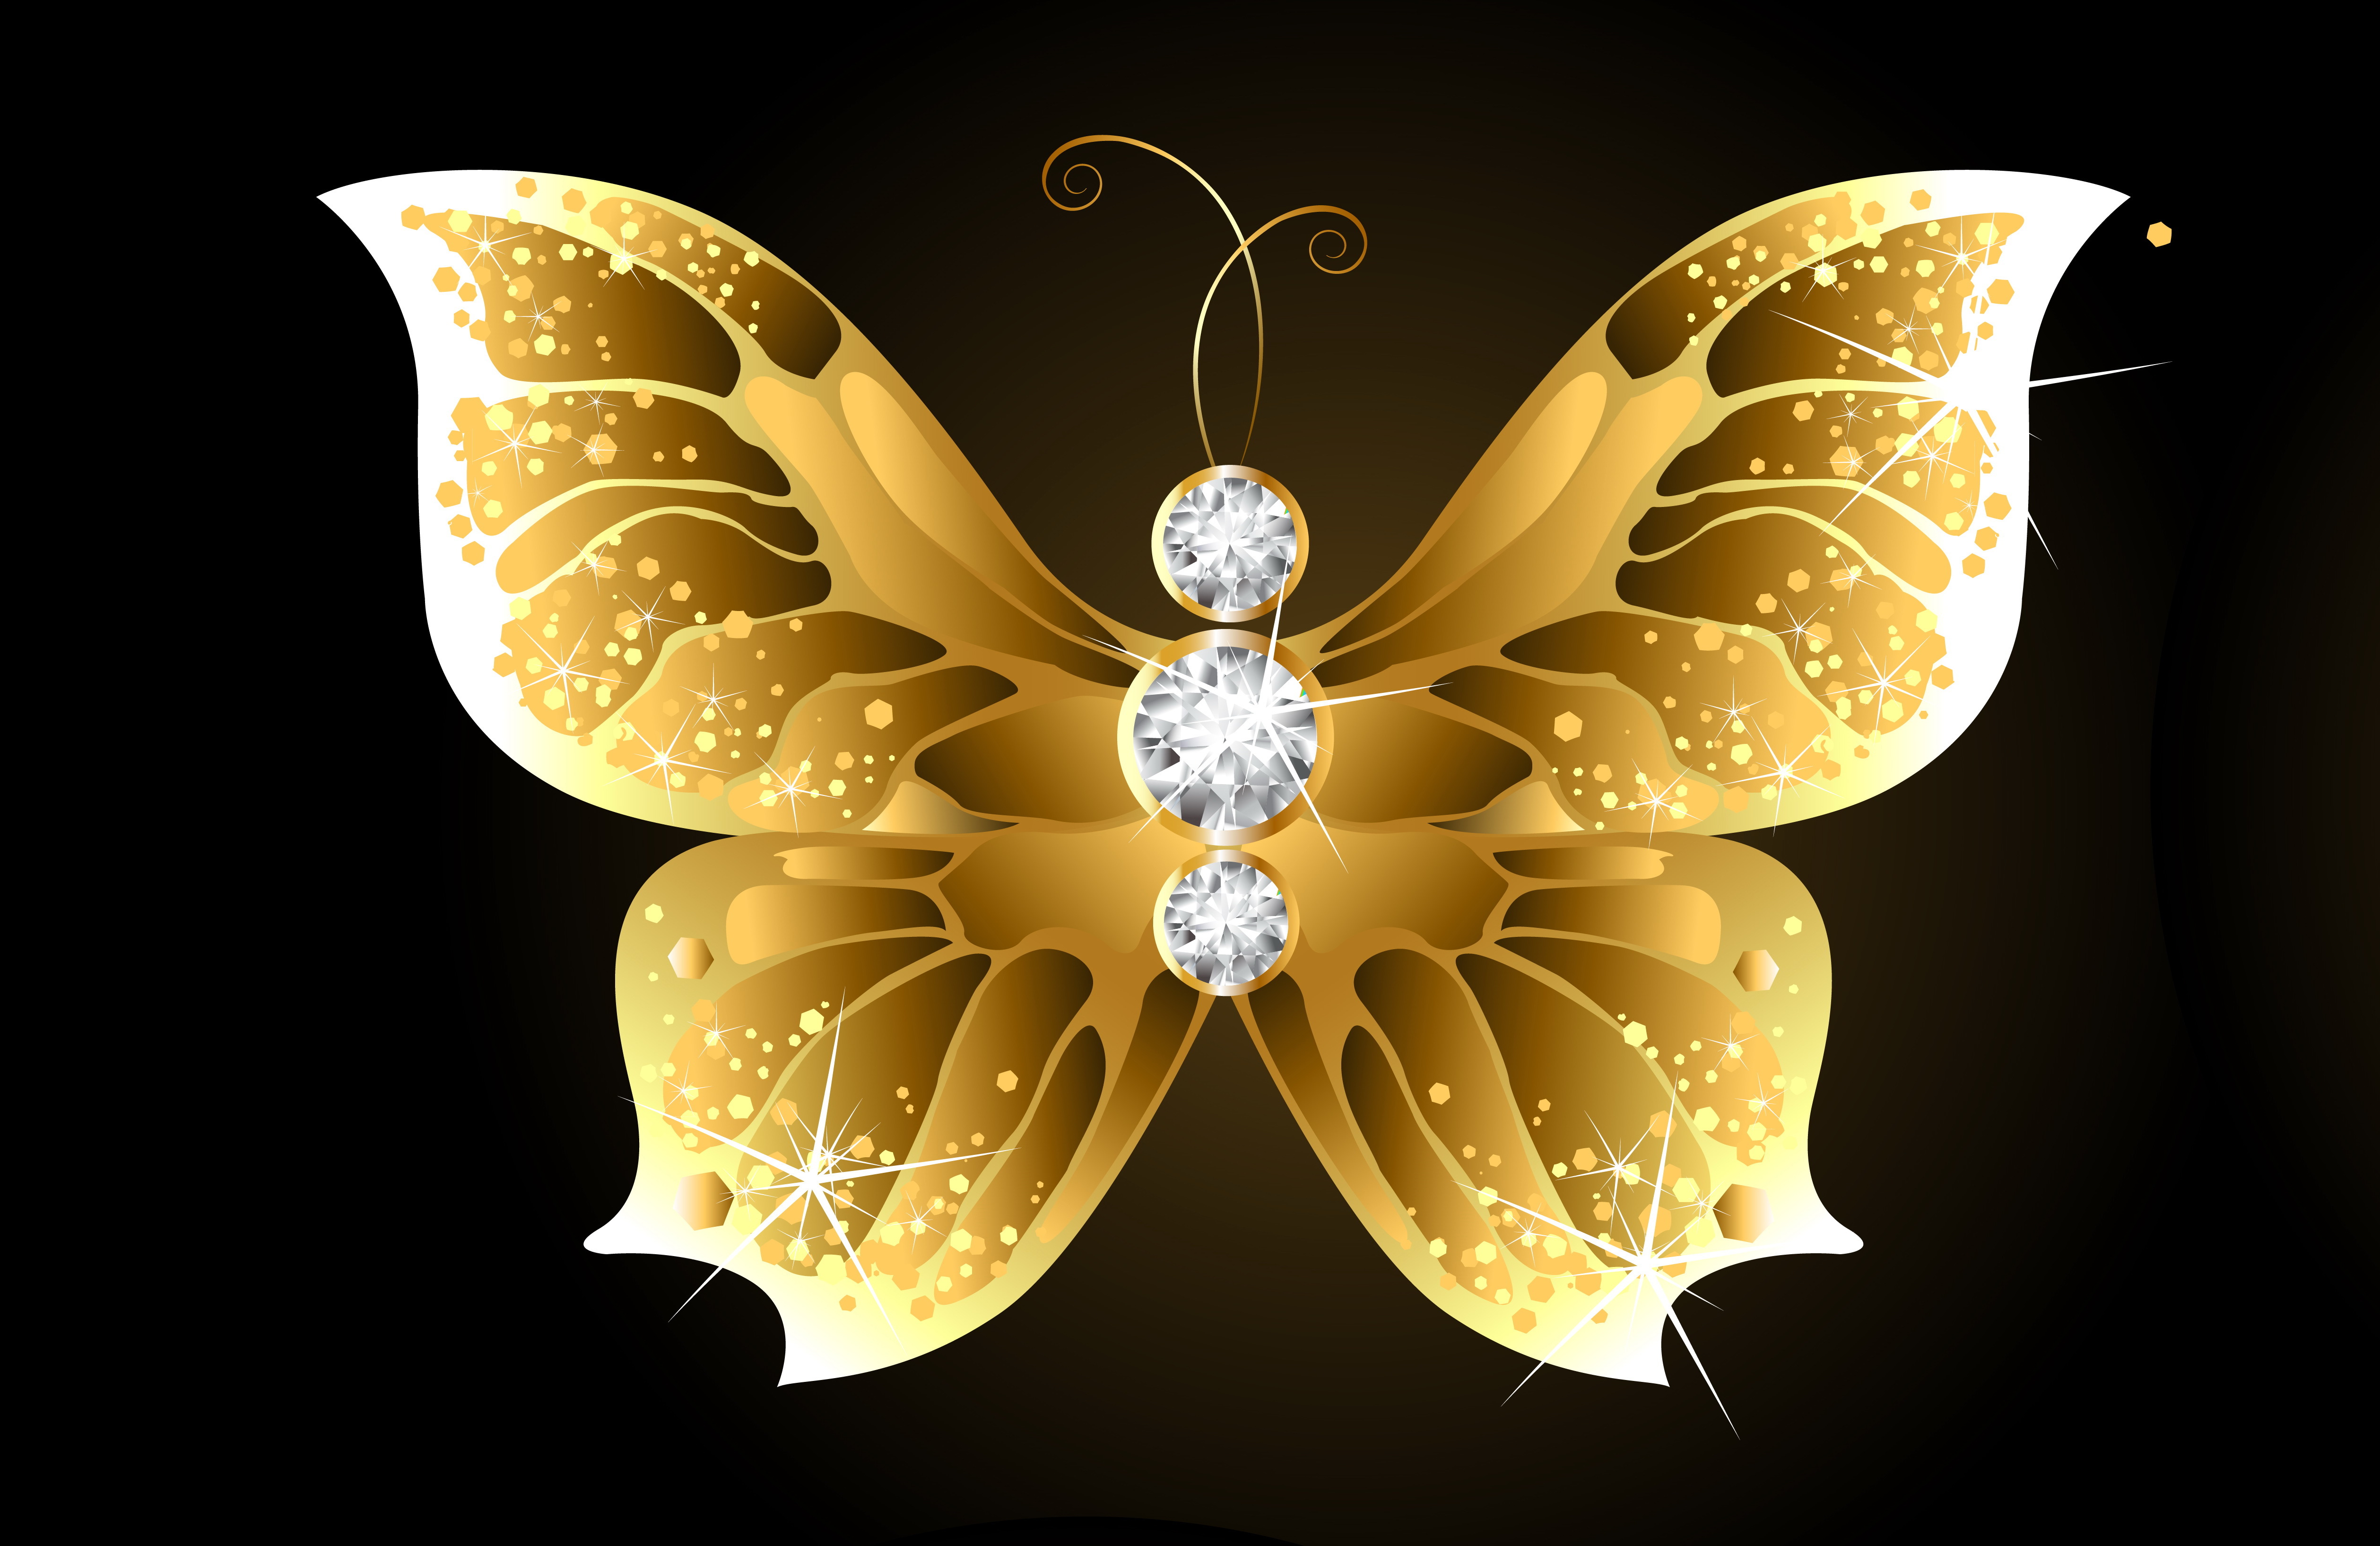 Golden Butterfly 4k Ultra HD Wallpaper and Background Image ...